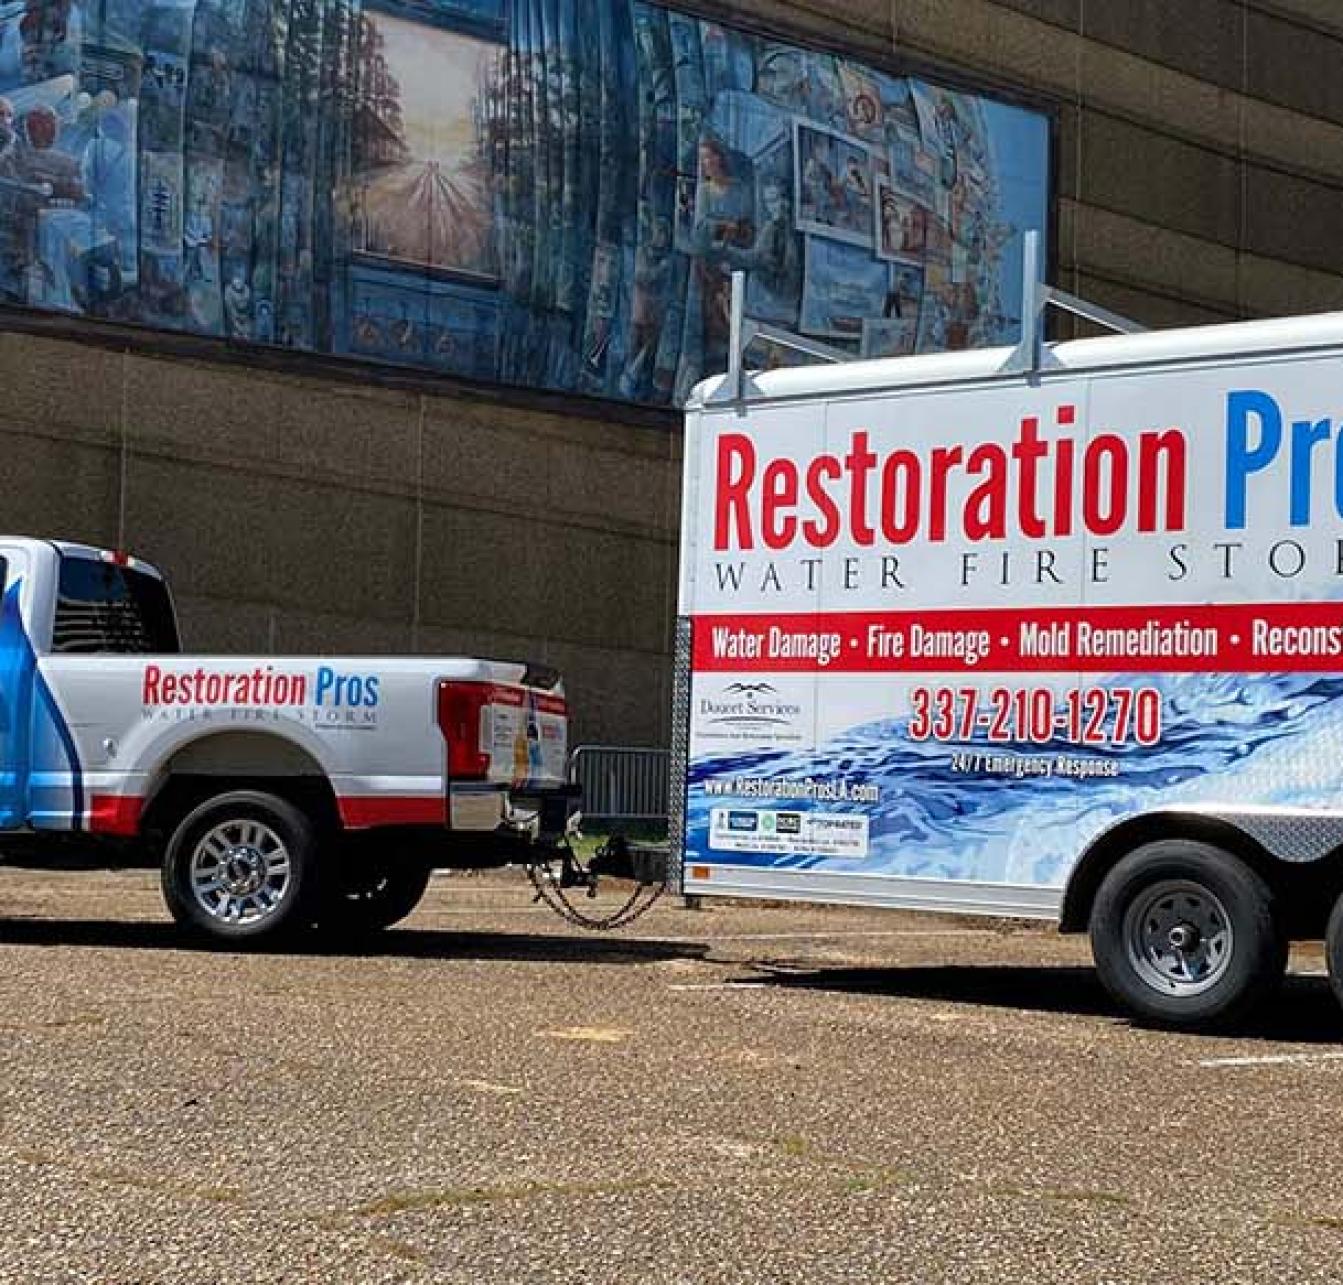 image of Restoration Pro company truck and trailer in parking lot of Lafayette, LA